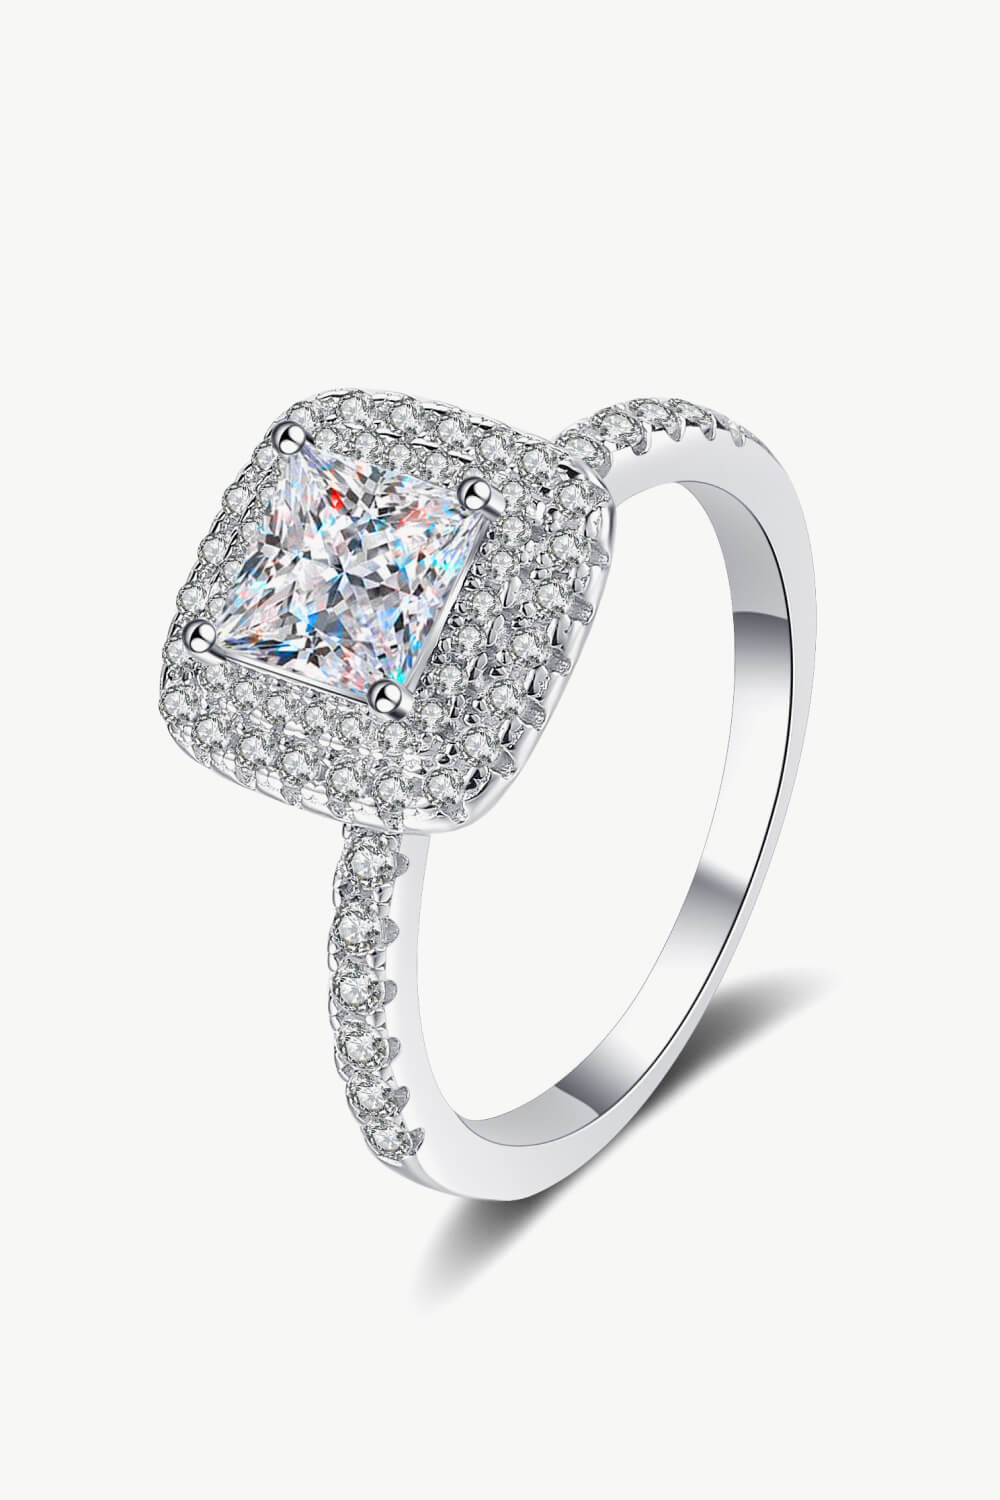 Sterling Silver 1 Carat Moissanite Ring - Thandynie